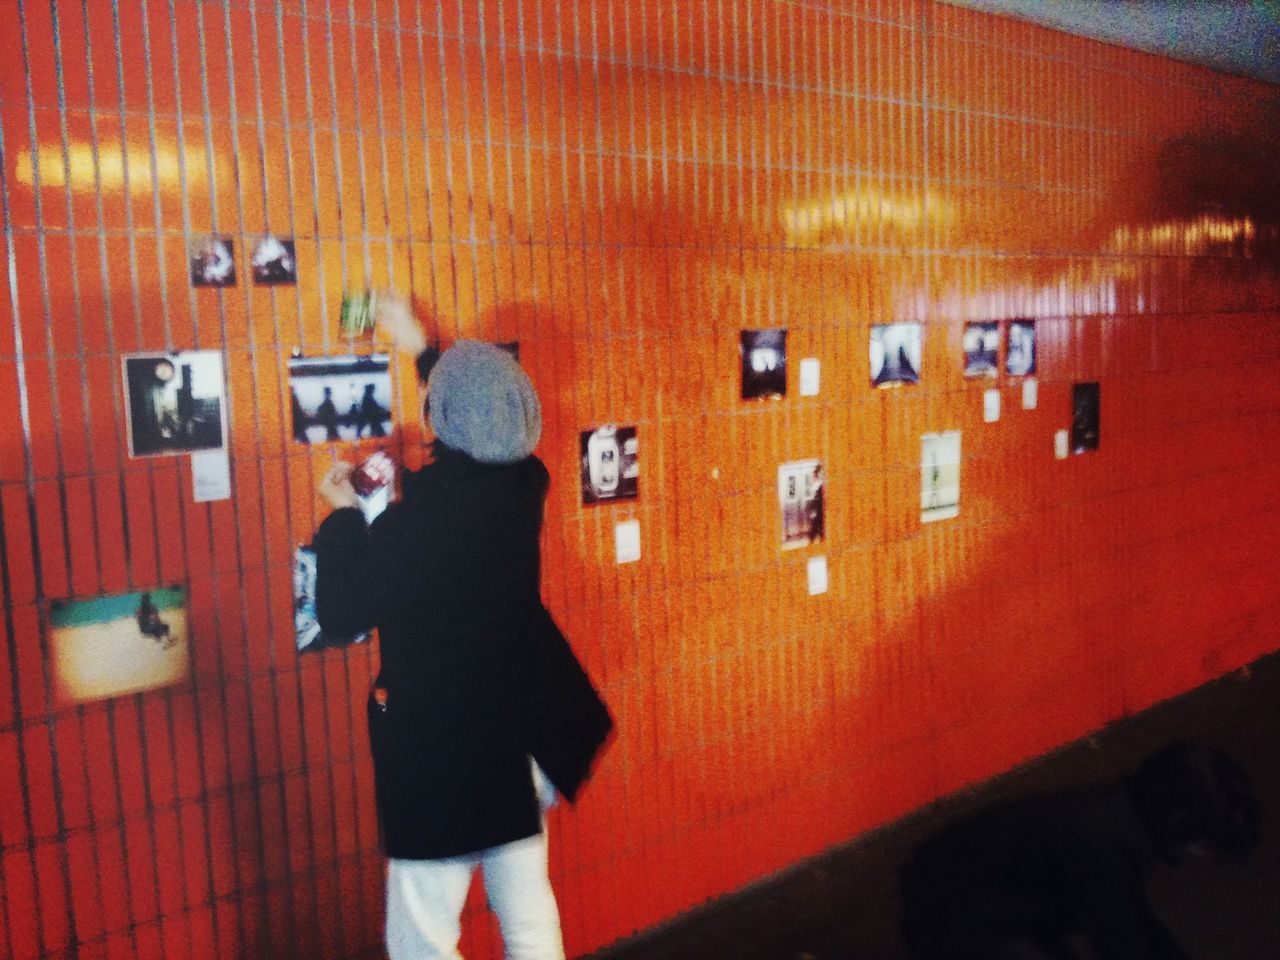 Rear view of a man looking at photographs on wall